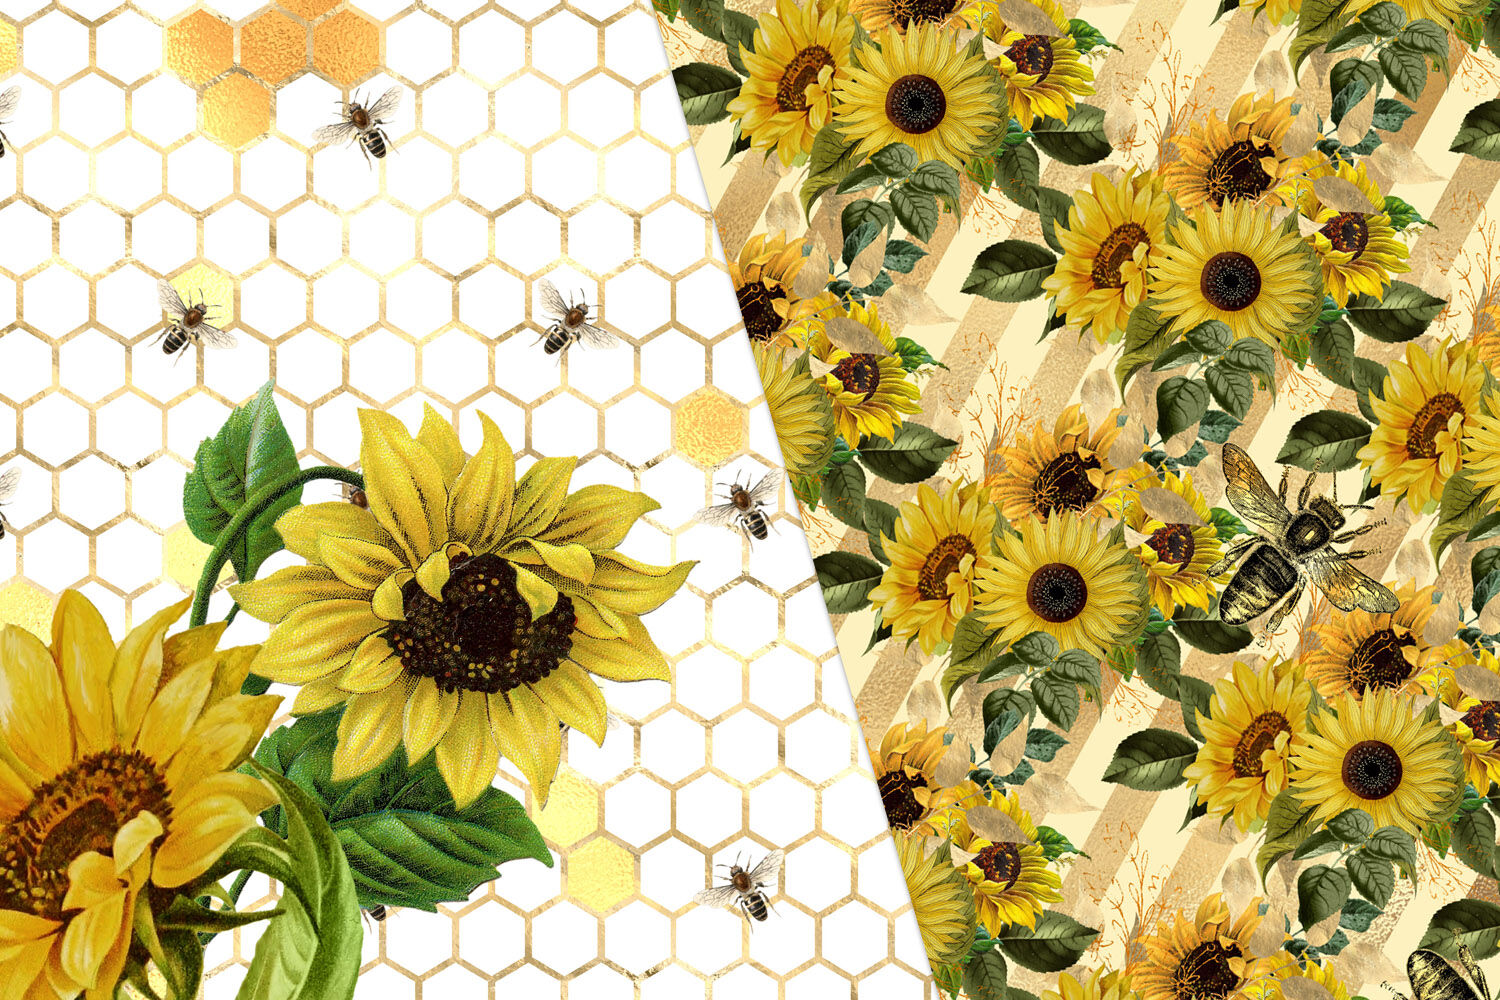 Download Sunflower Bees Digital Paper By Digital Curio ...